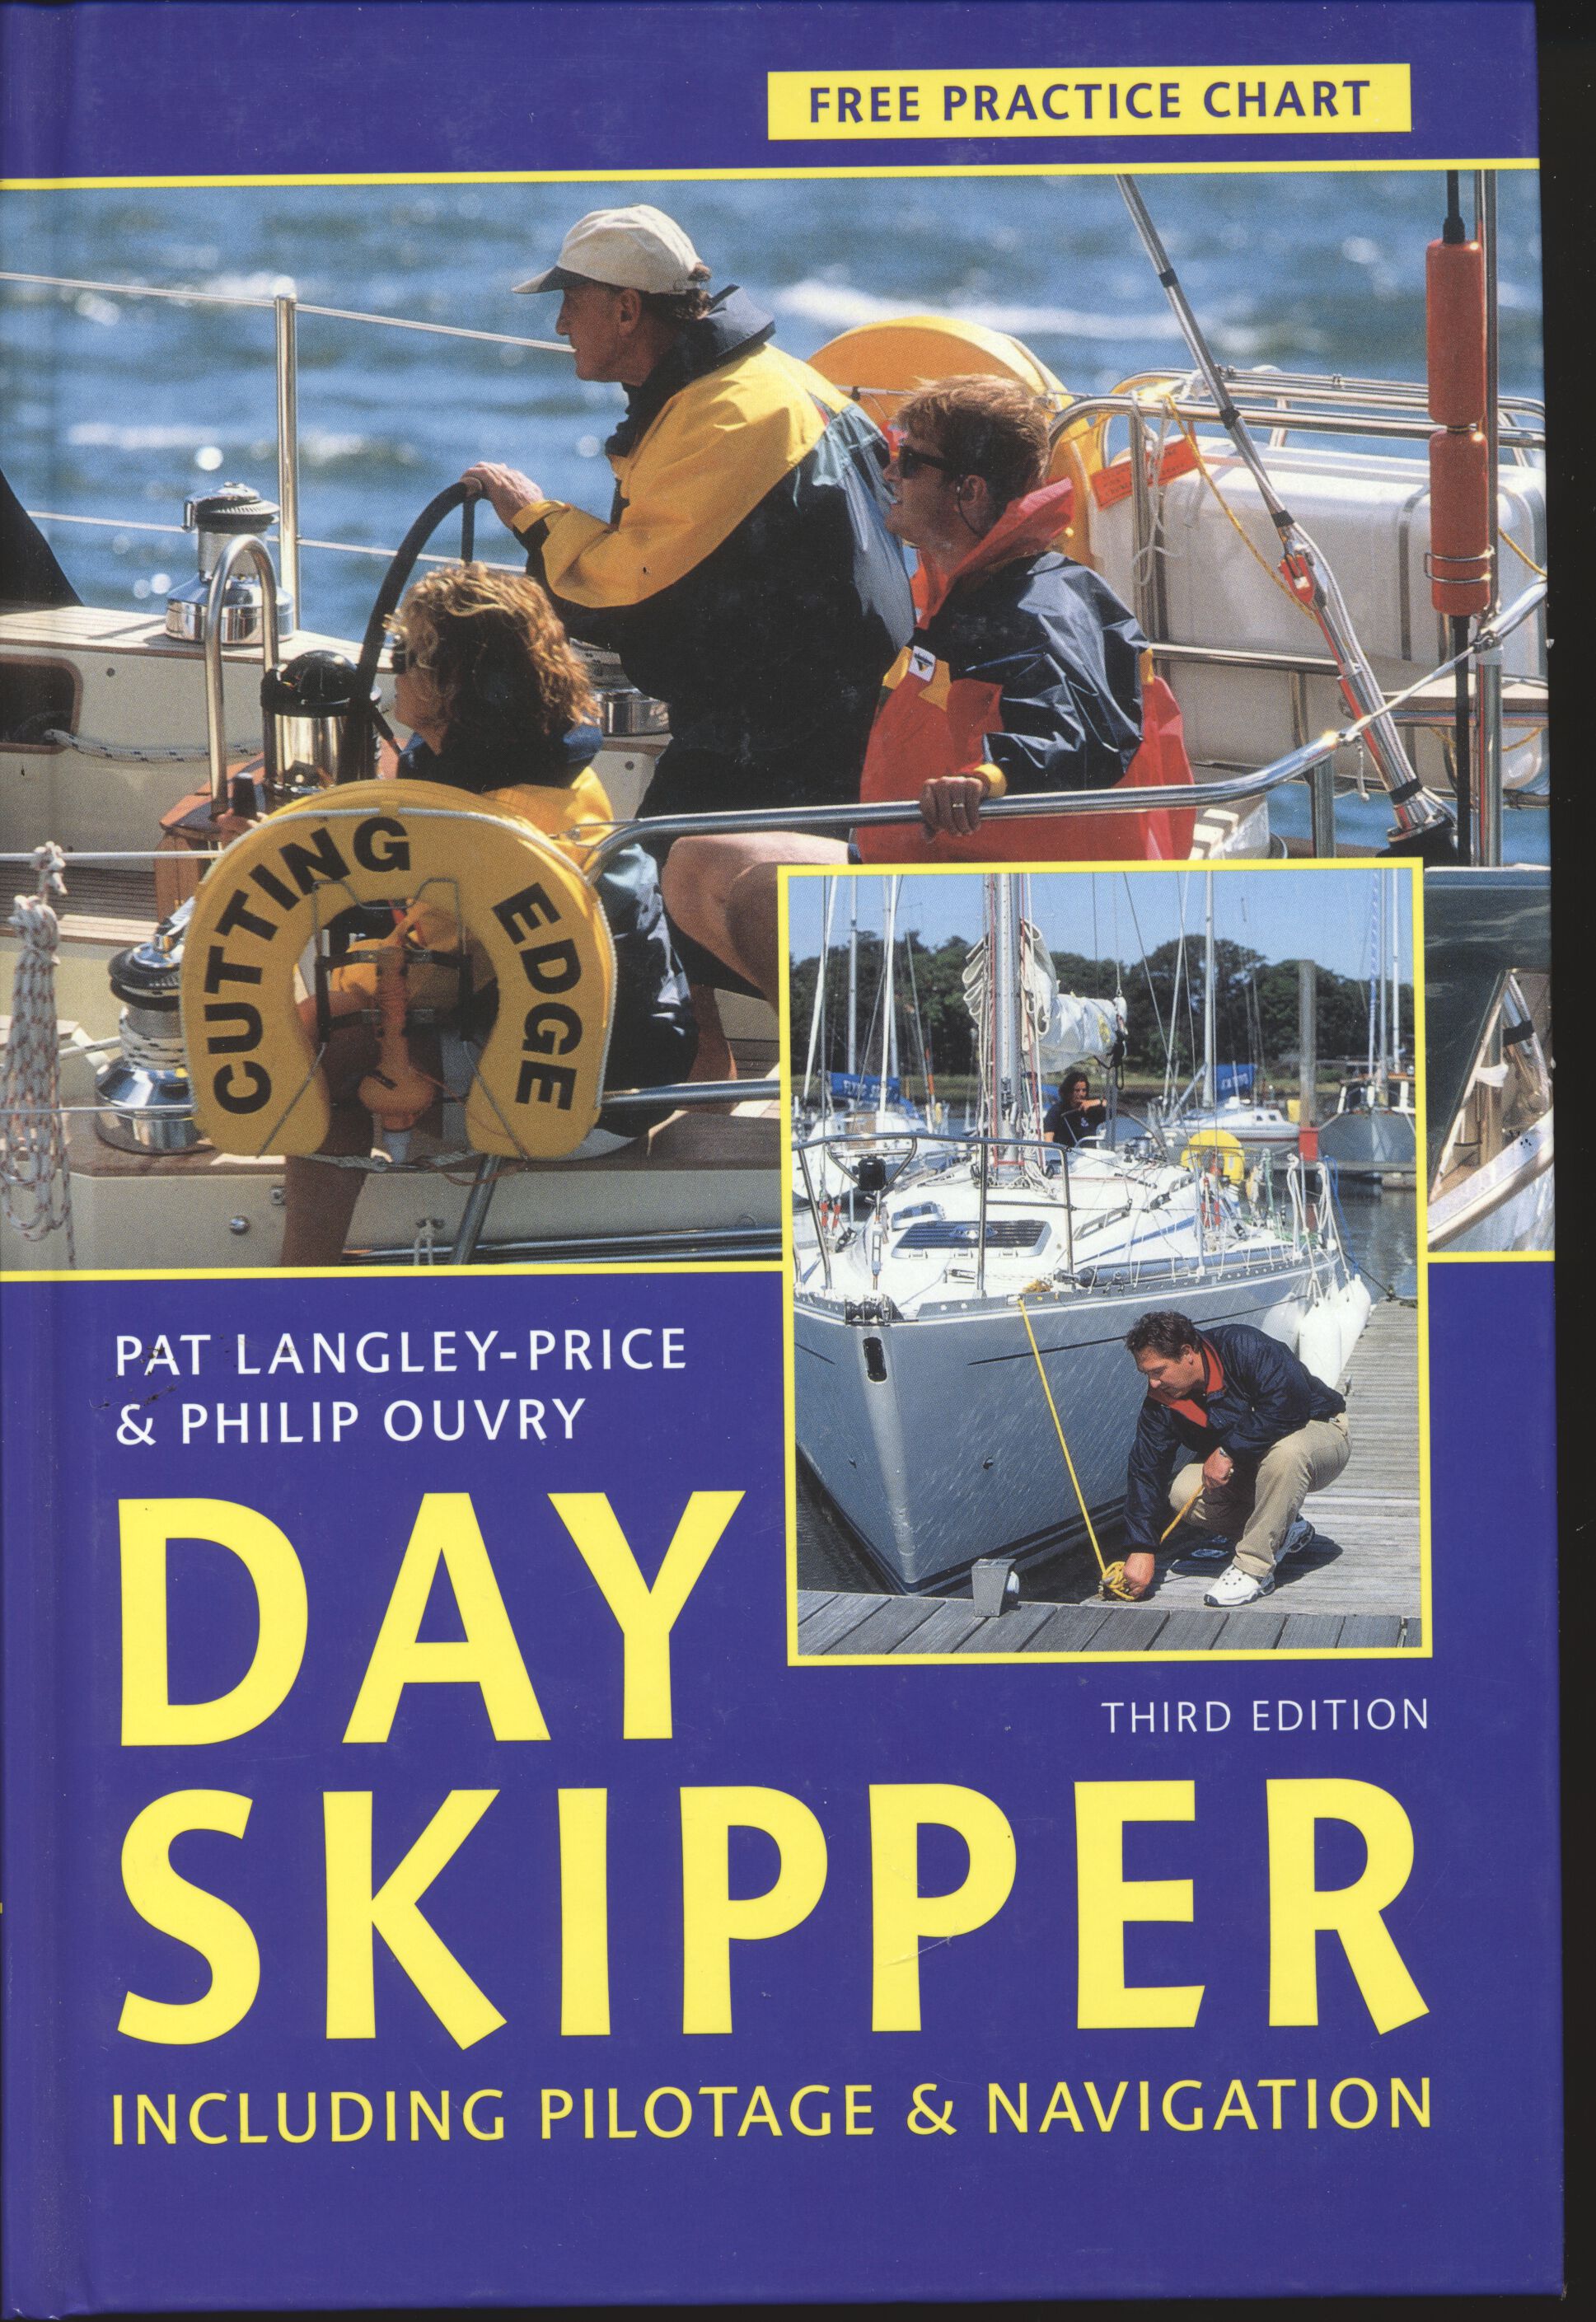 Day Skipper including Pilotage and Navigation - Pat Langley-Price and Philip Ouvry